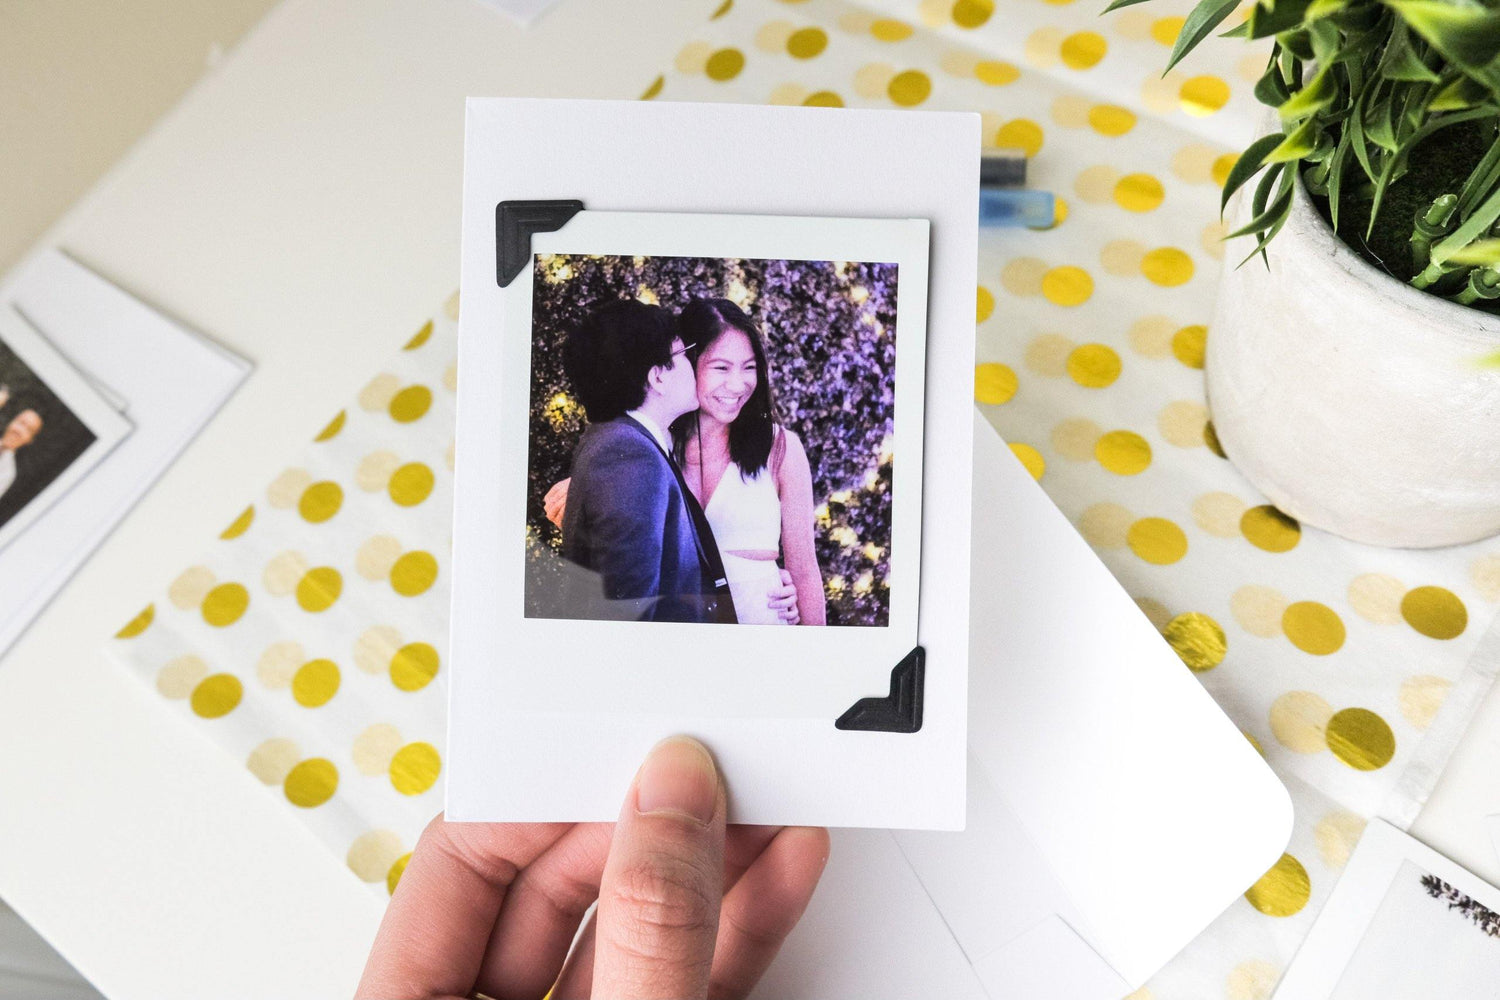 Card with Custom Polaroid Photo | Includes envelope and free gift message | Personalized instax mini or square picture print gift